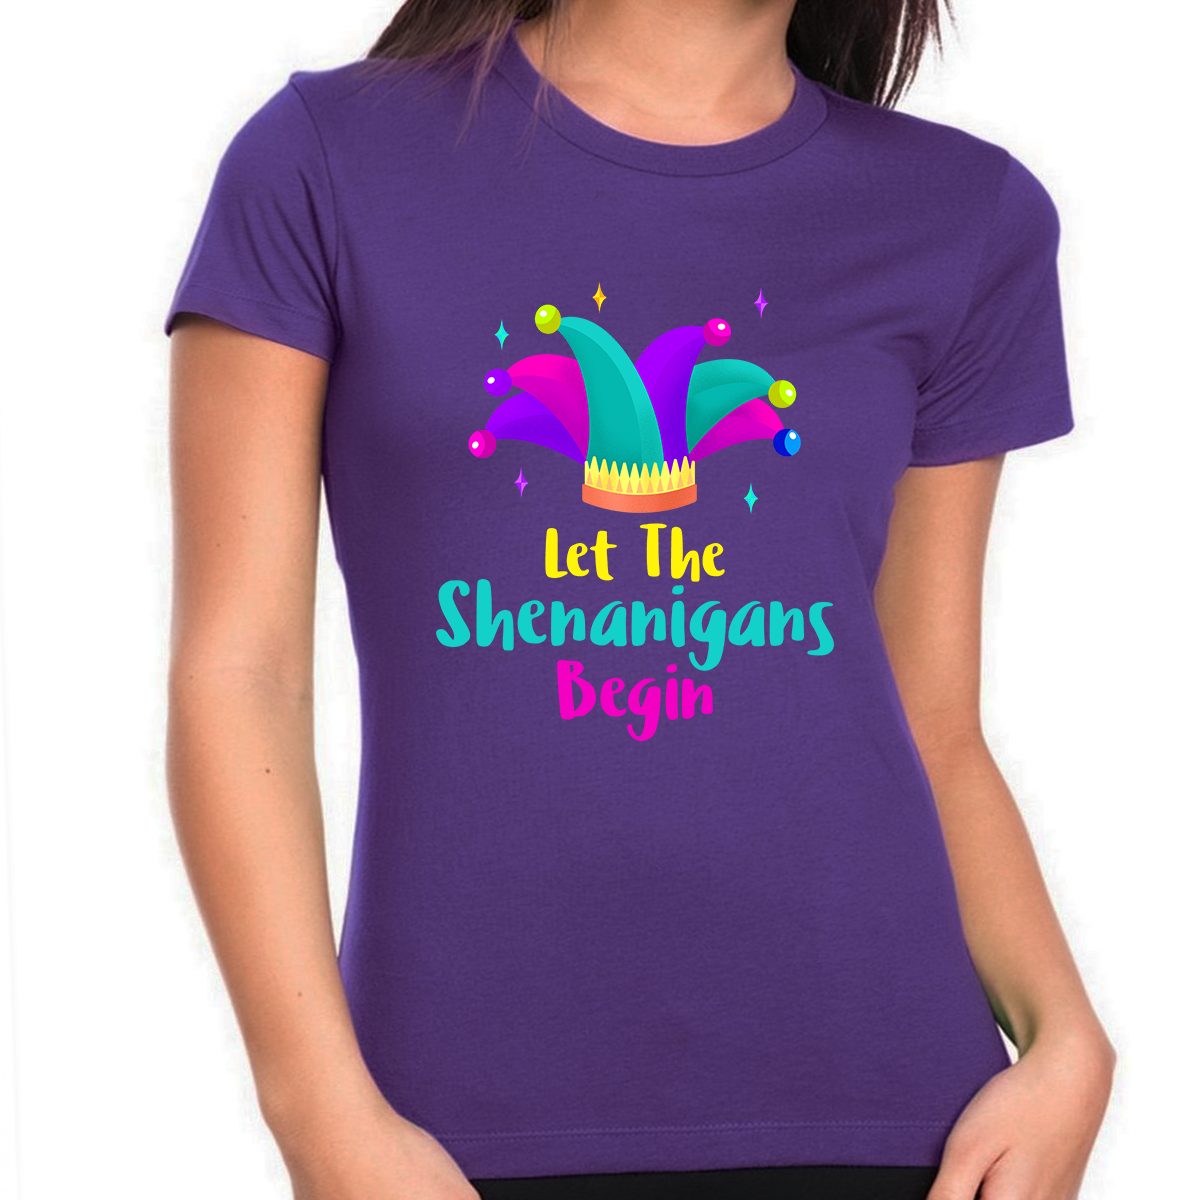 Cute Mardi Gras Shirts for Women Funny Let The Shenanigans Begin Mardi Gras Outfit for Women New Orleans